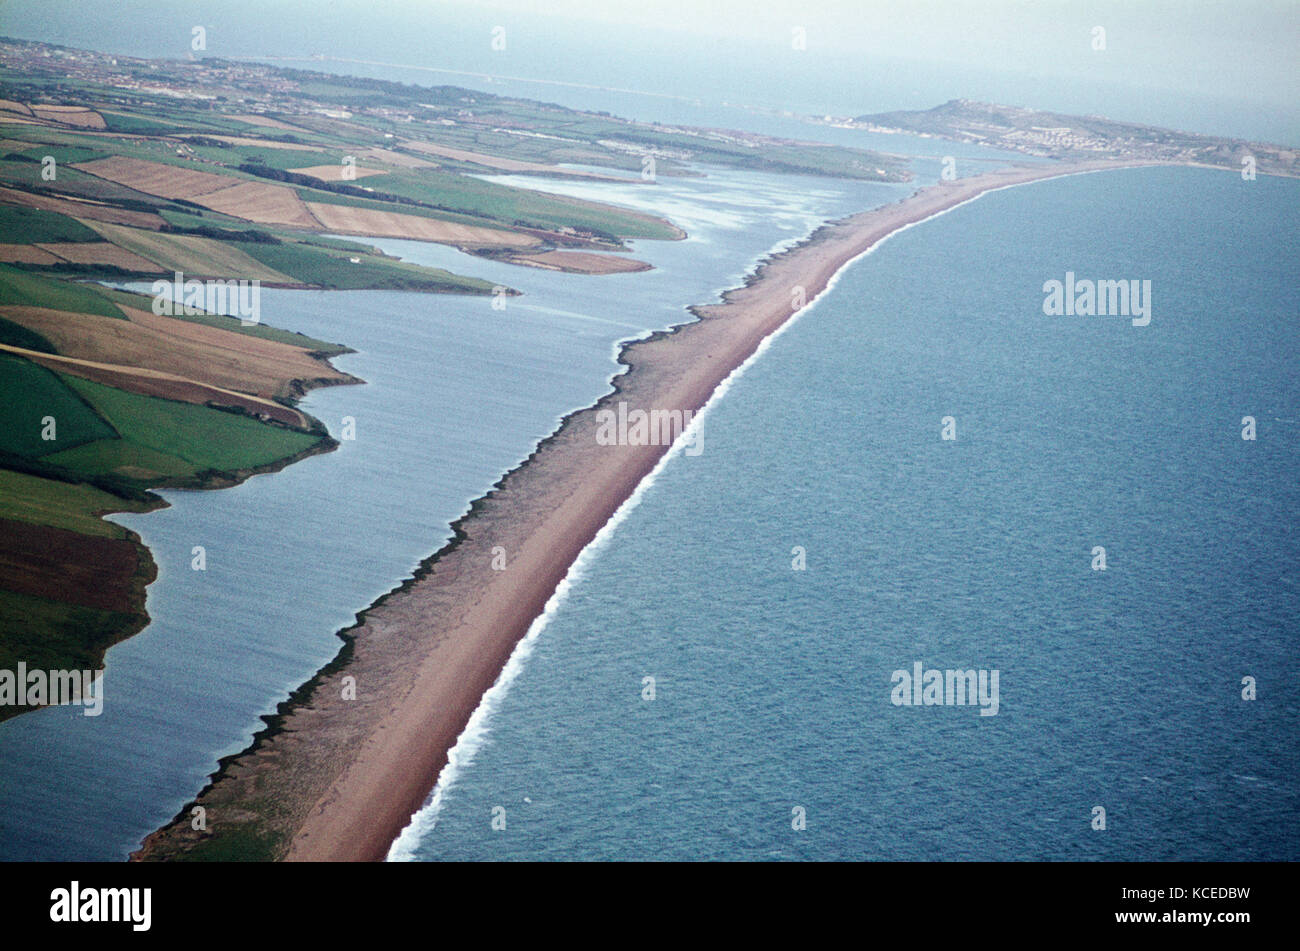 Chesil Beach - Formation